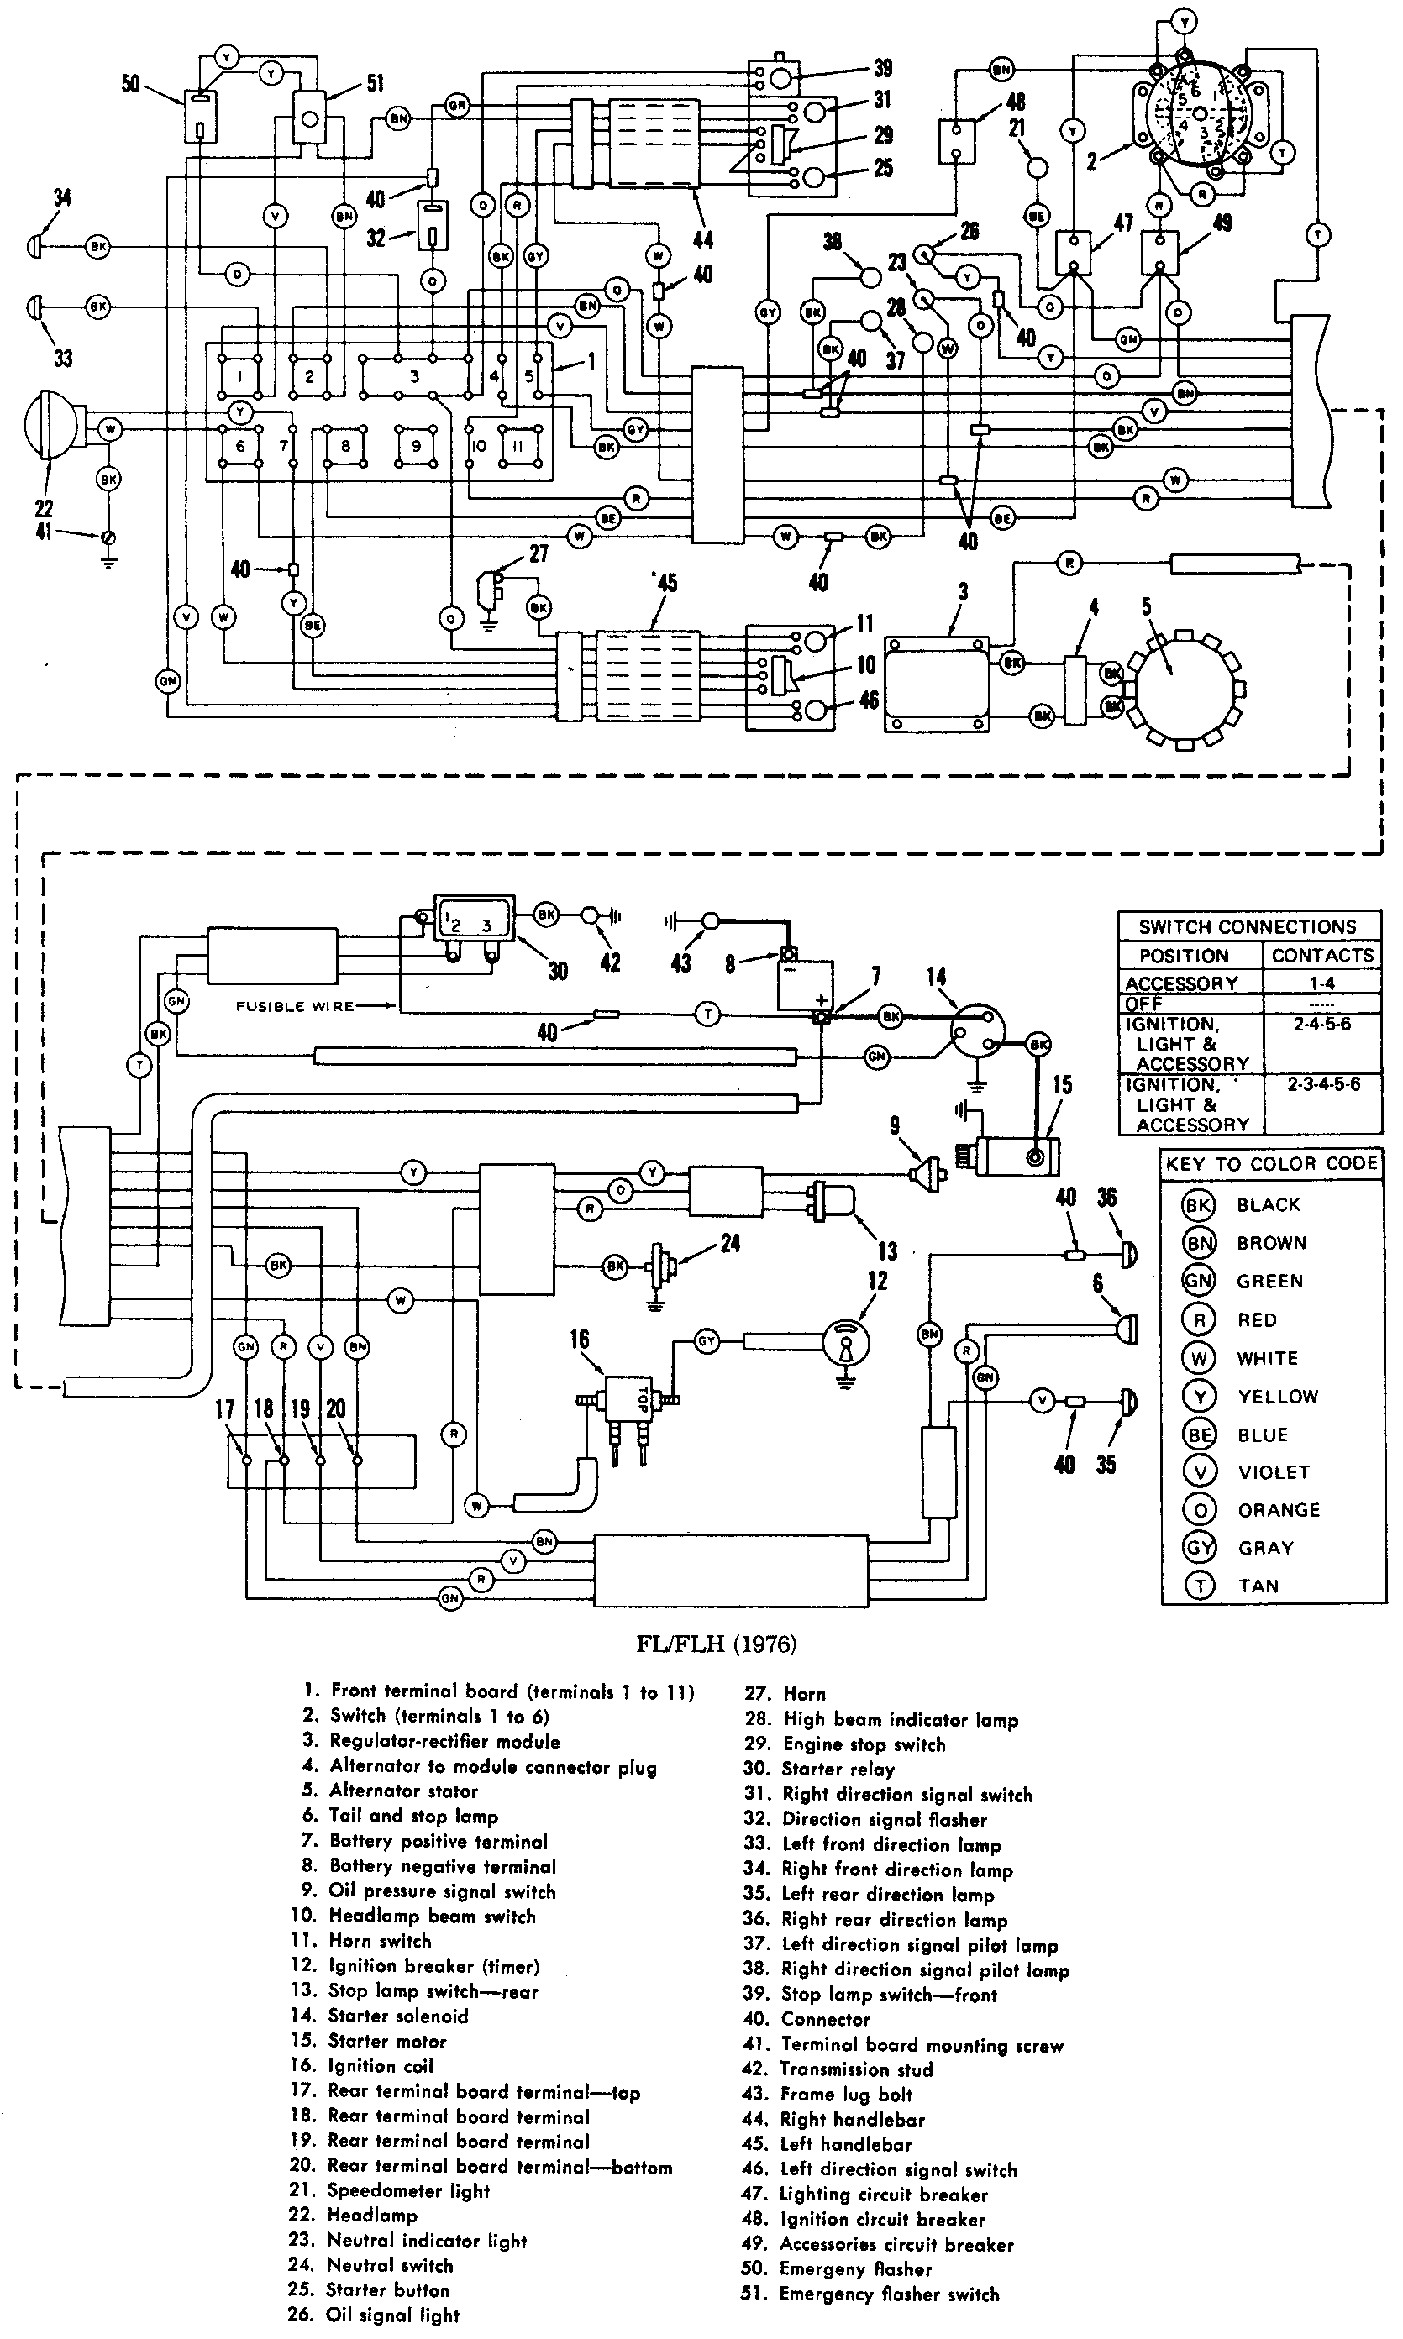 Bunch Ideas Harley Davidson Sportster Wiring Diagram Carlplant Noticeable And For Your 2001 Harley